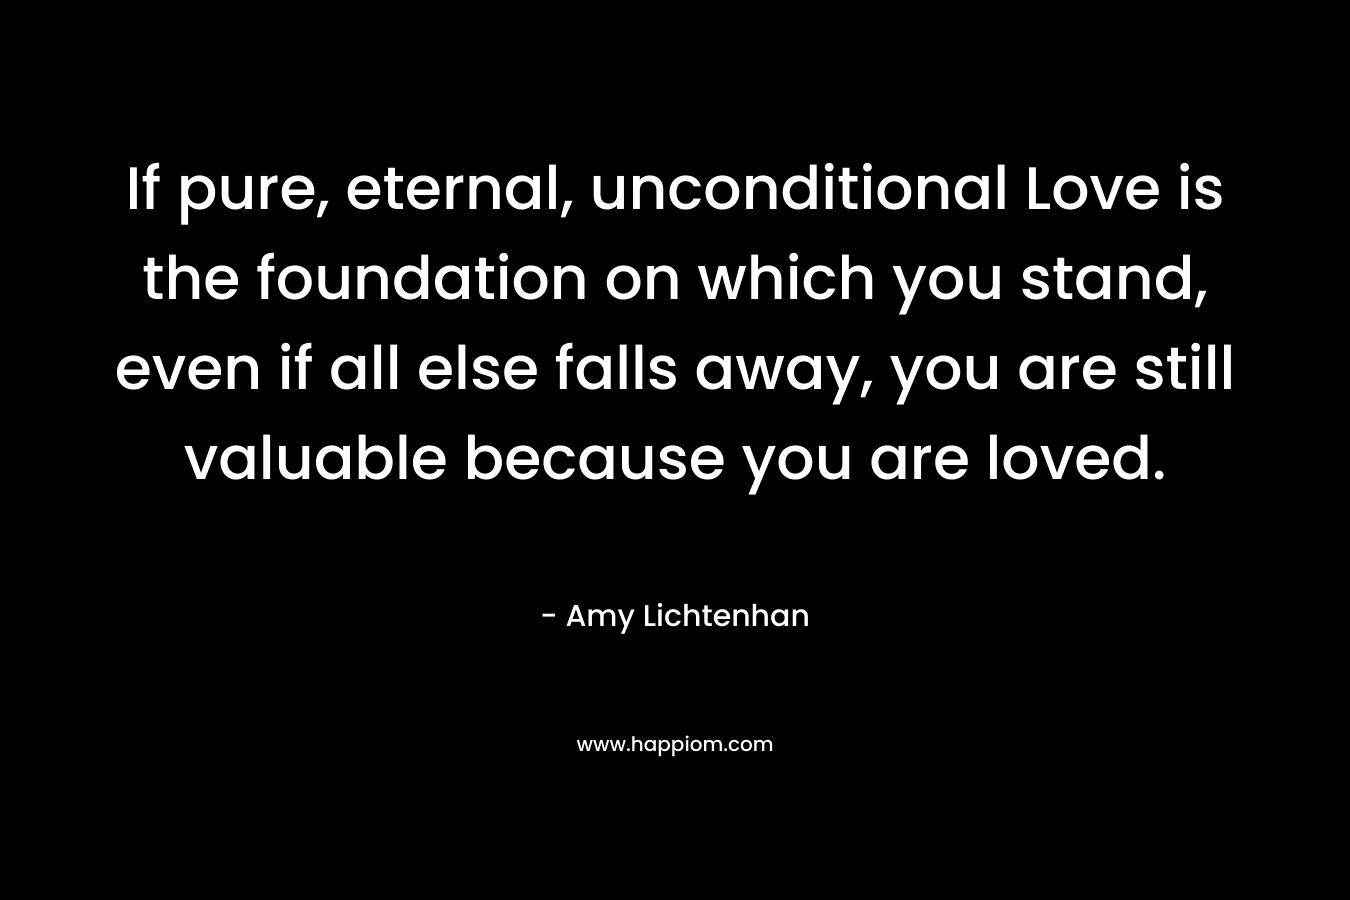 If pure, eternal, unconditional Love is the foundation on which you stand, even if all else falls away, you are still valuable because you are loved. – Amy Lichtenhan